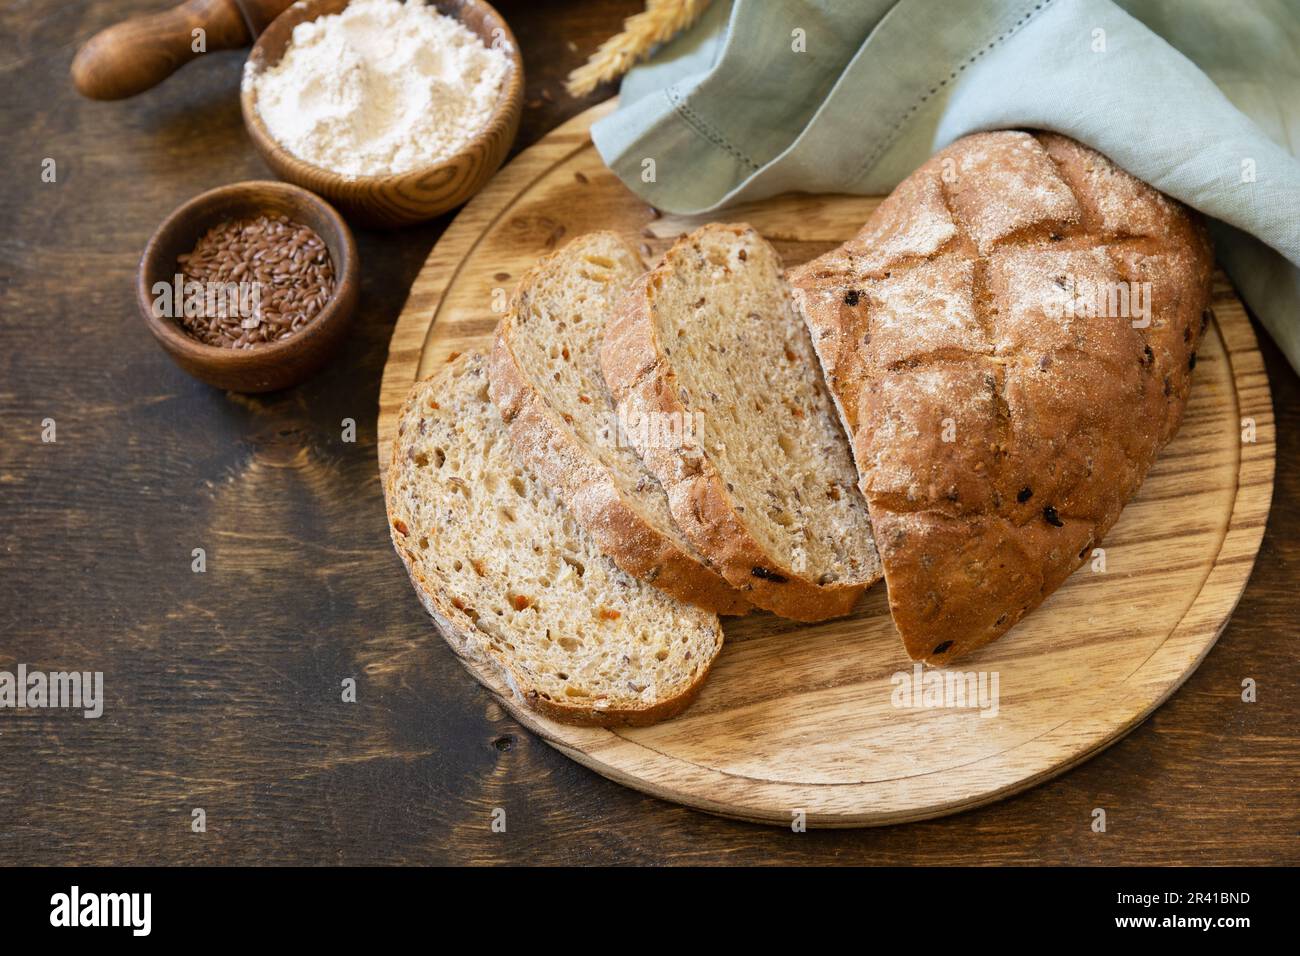 Homemade baking. Bread from whole wheat grains, wheat bran, seeds, bio-ingredients over rustic table background, healthy lifesty Stock Photo